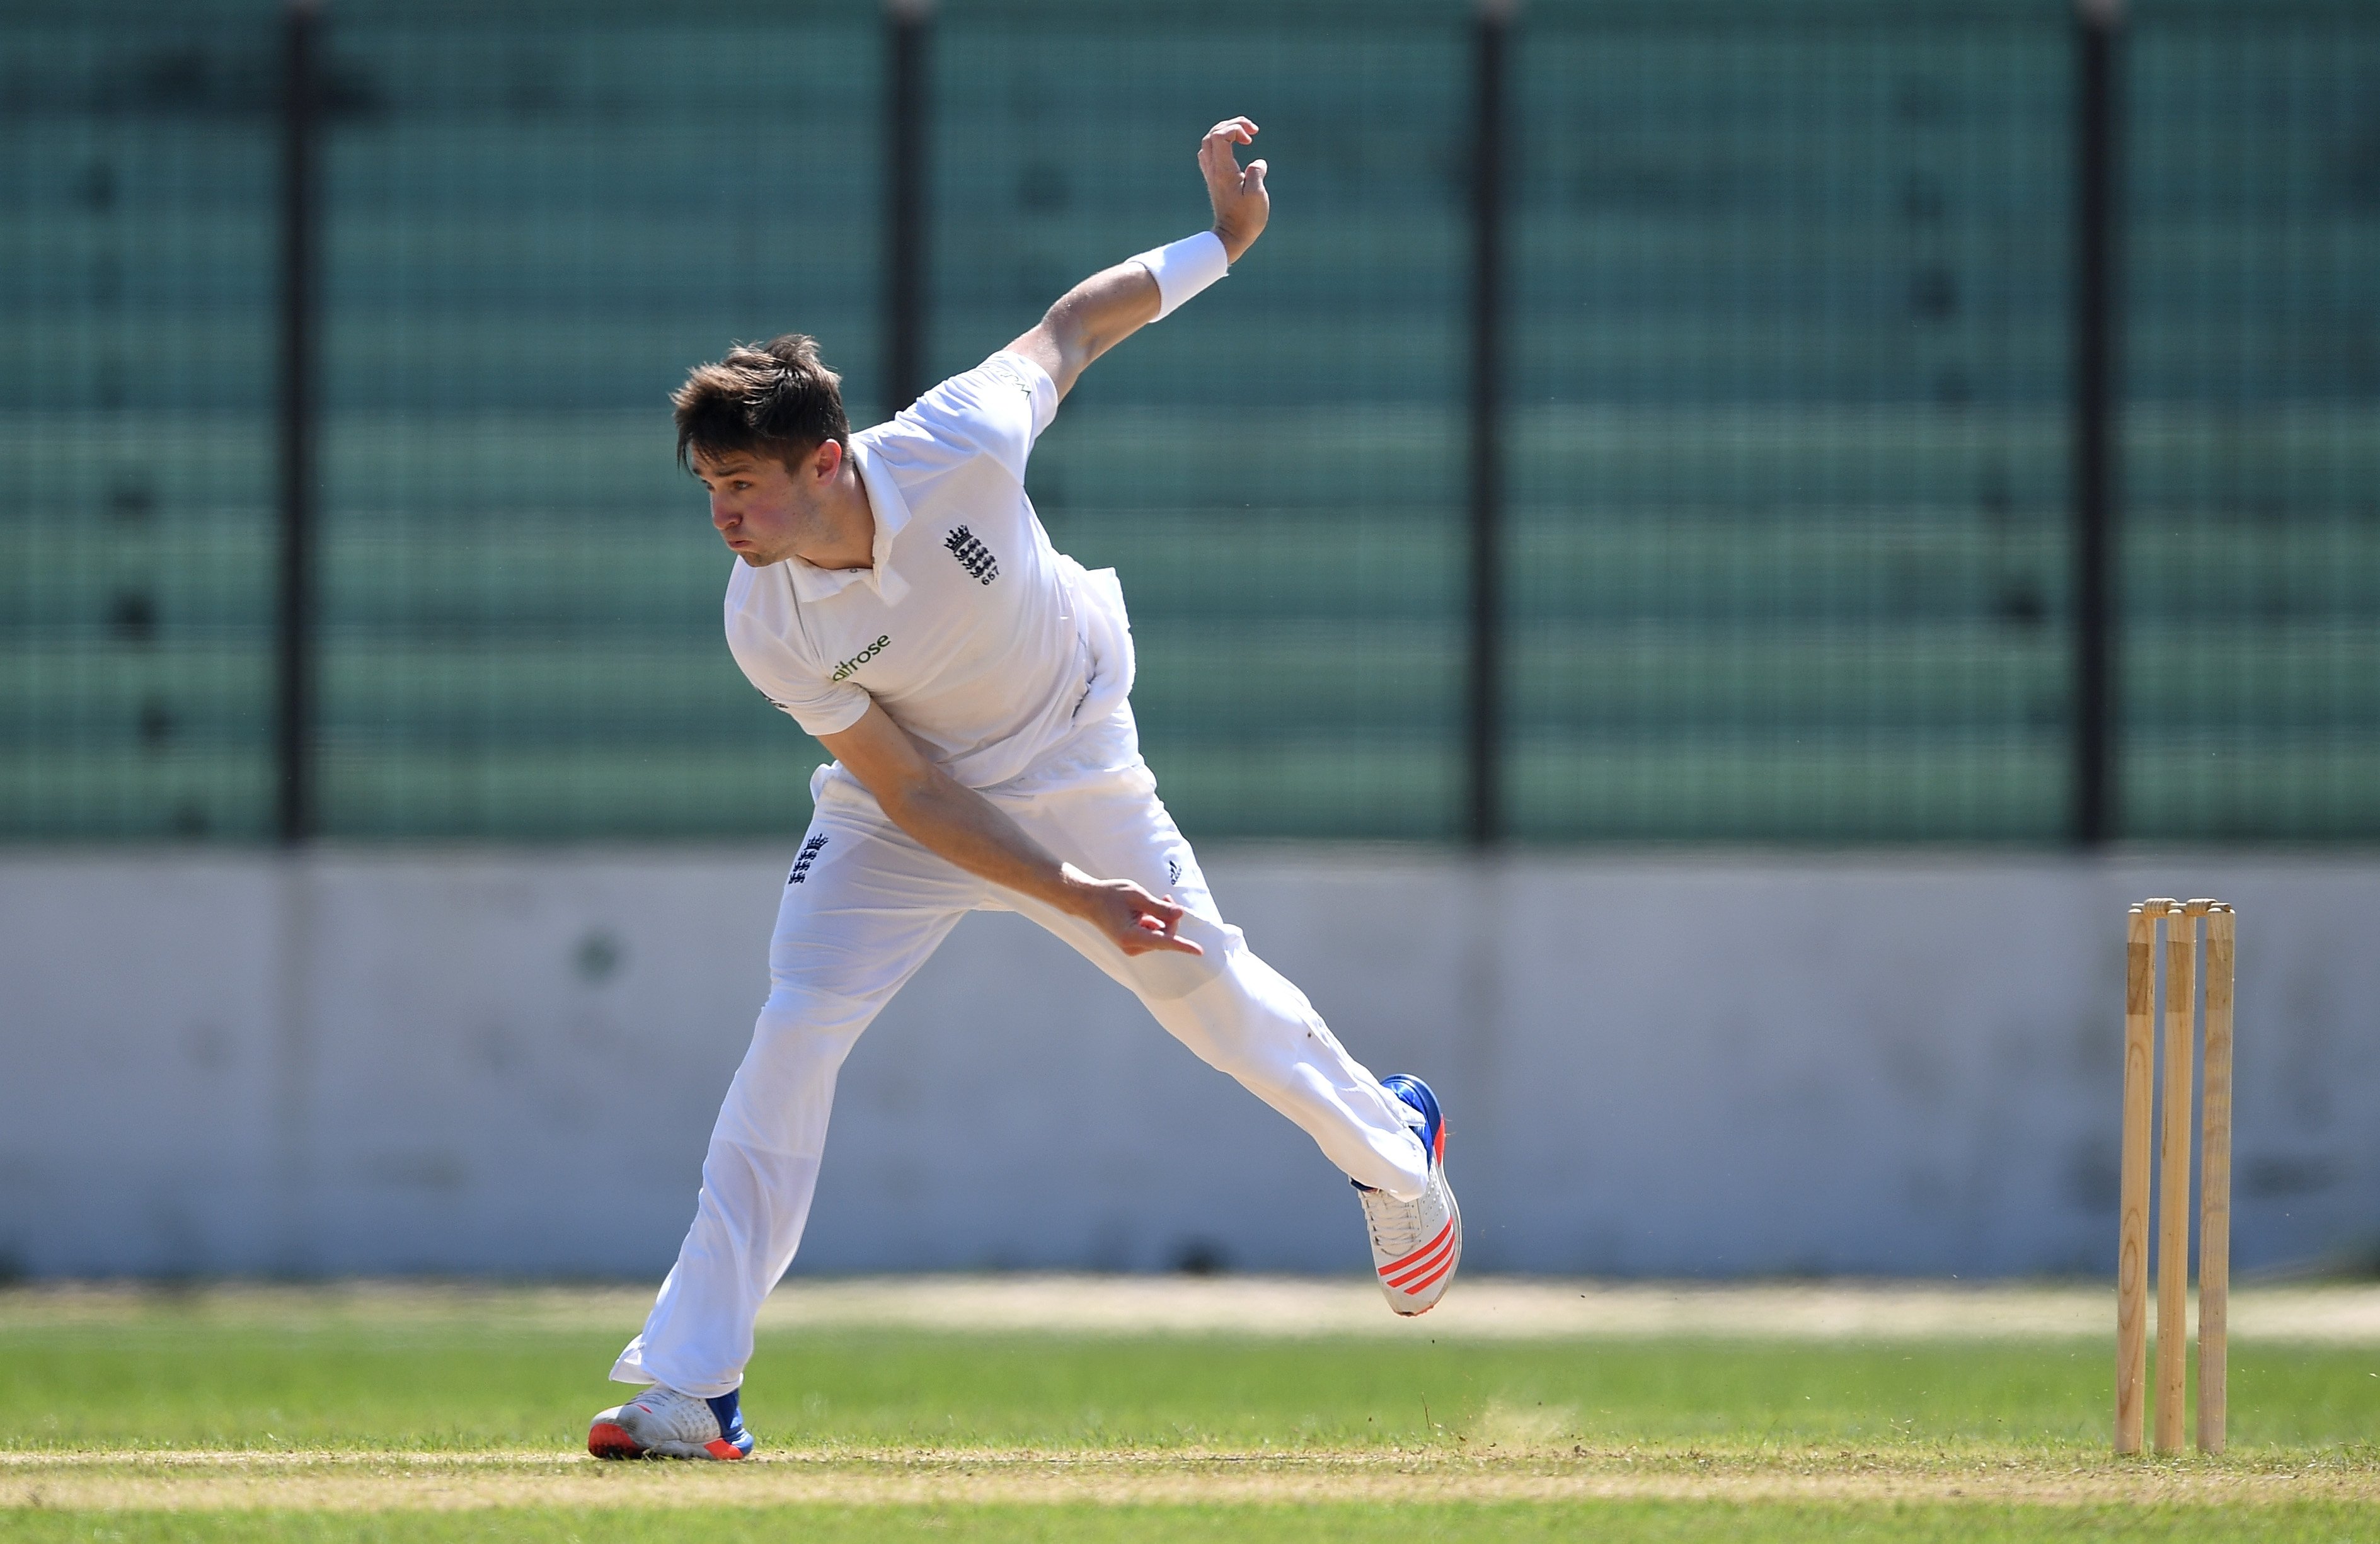 WATCH | Chris Woakes dismisses Alex Carey with scintillating football skills